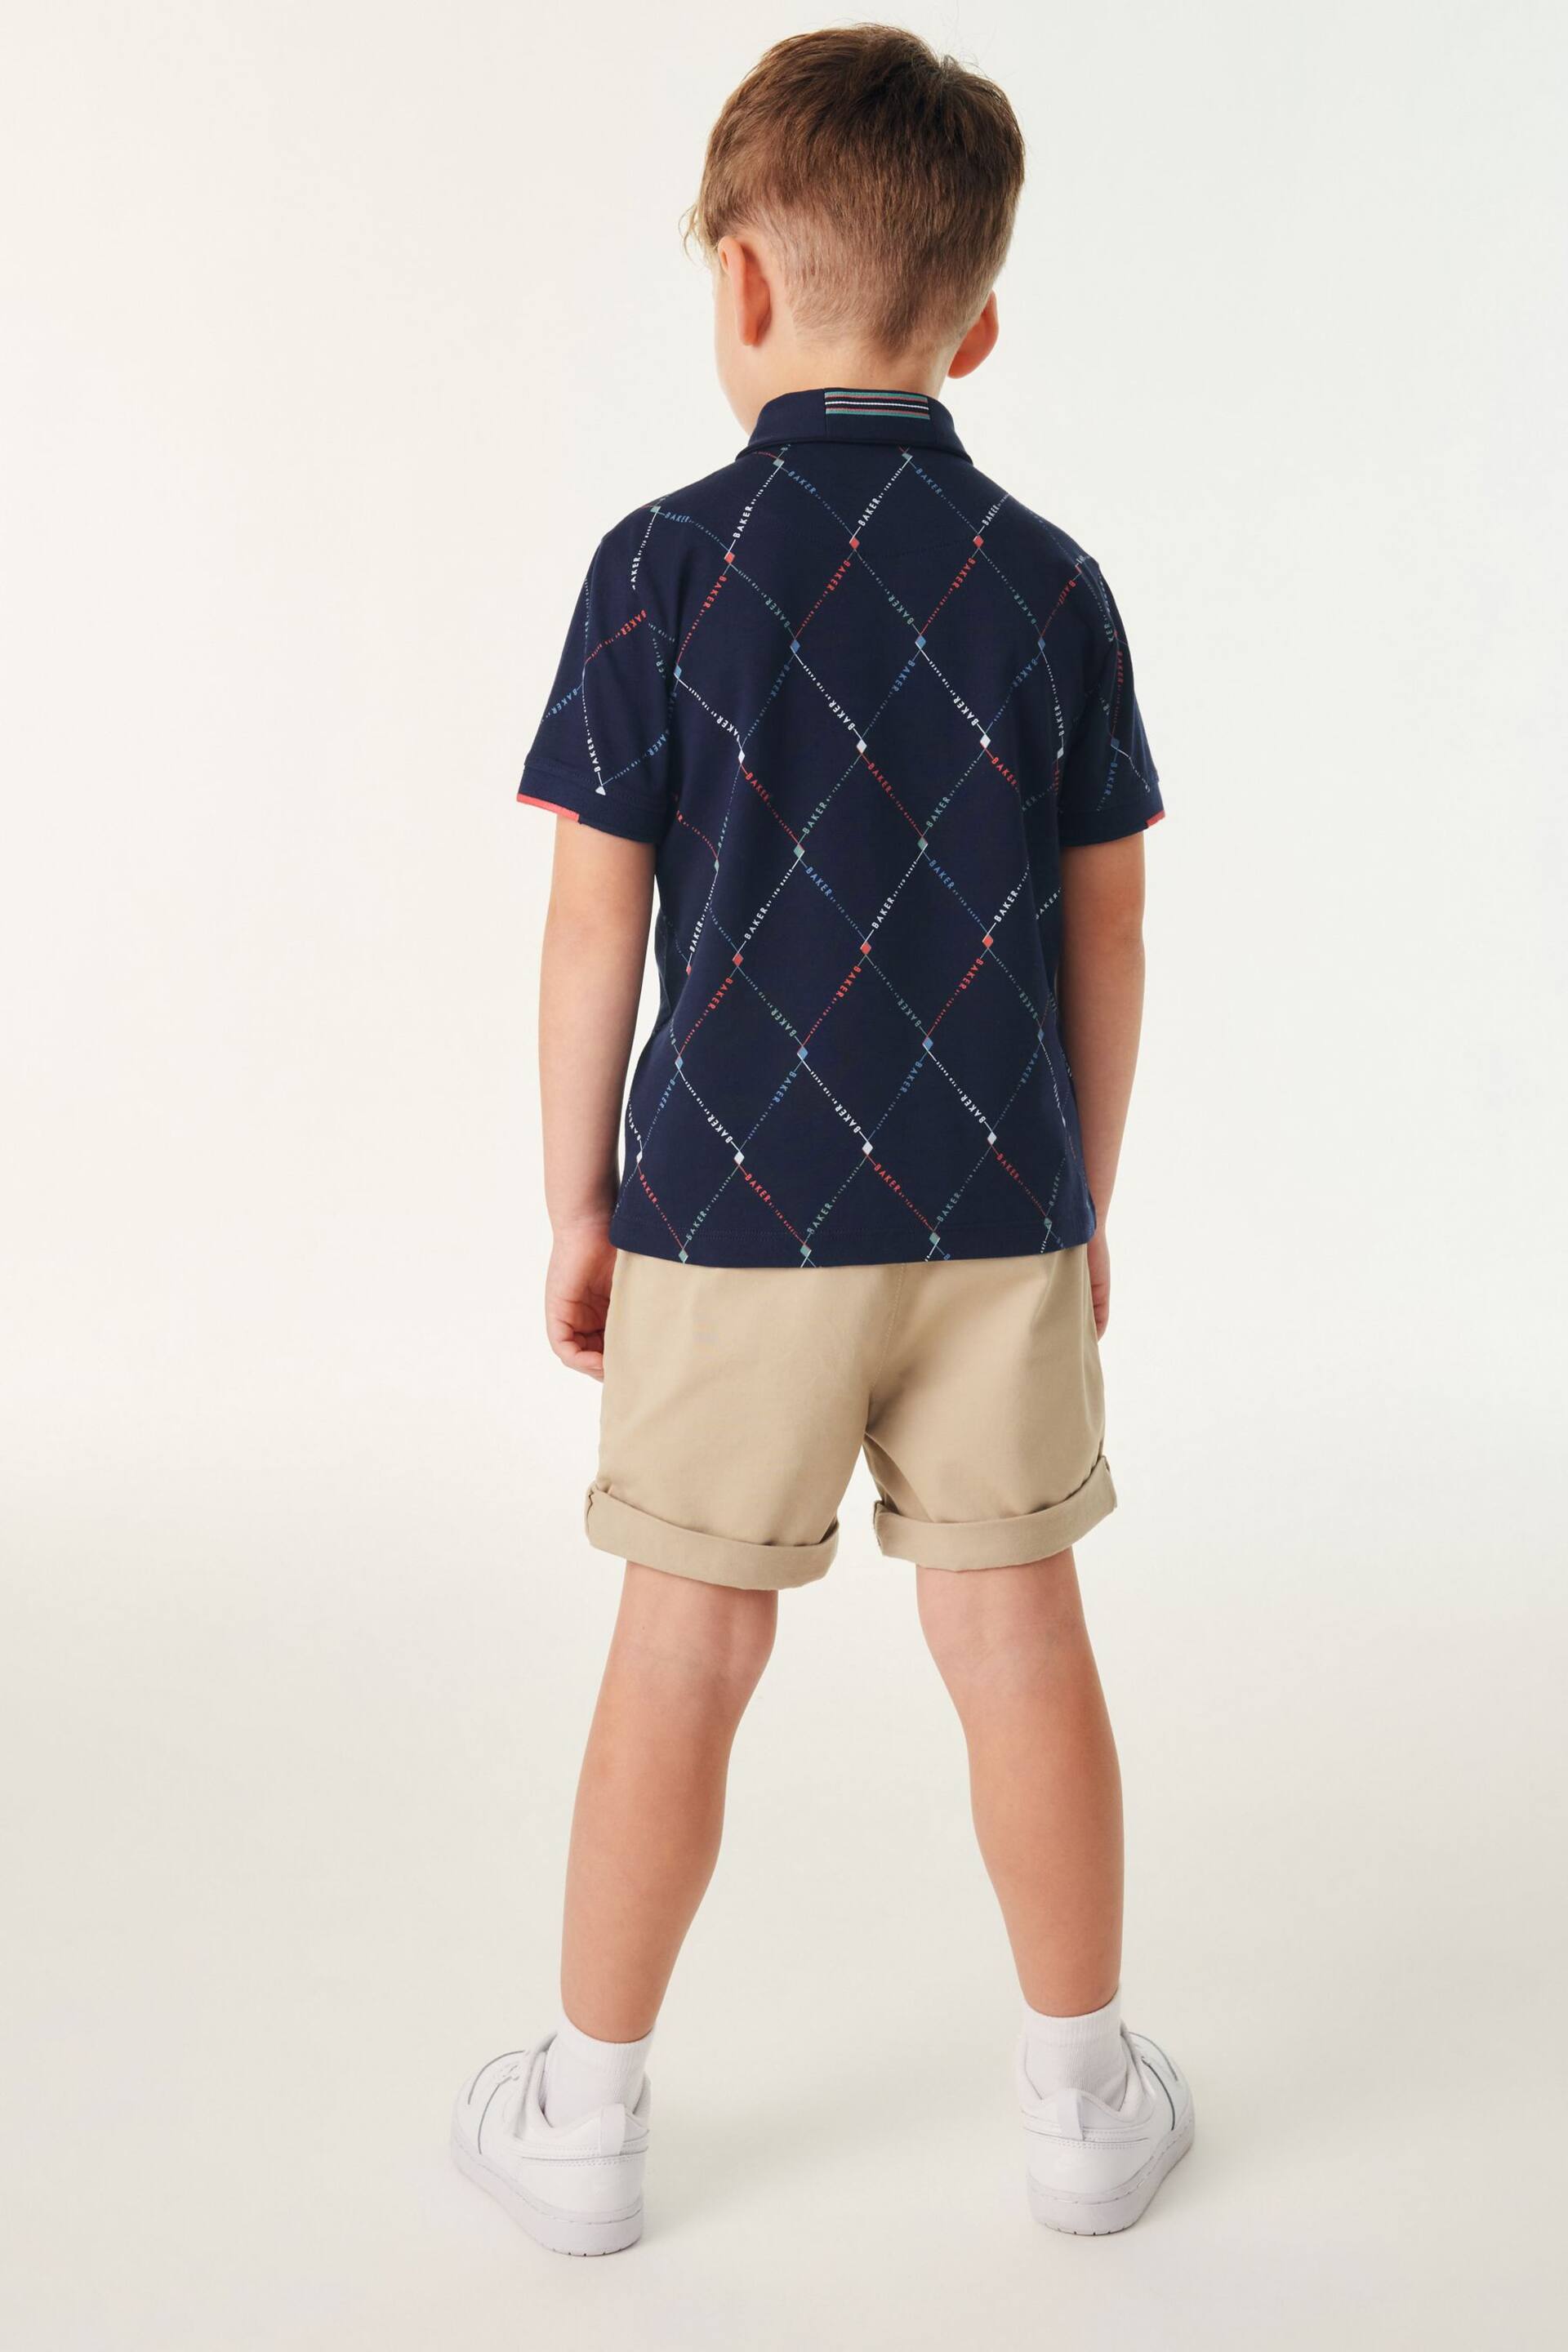 Baker by Ted Baker Printed Polo Shirt - Image 2 of 10